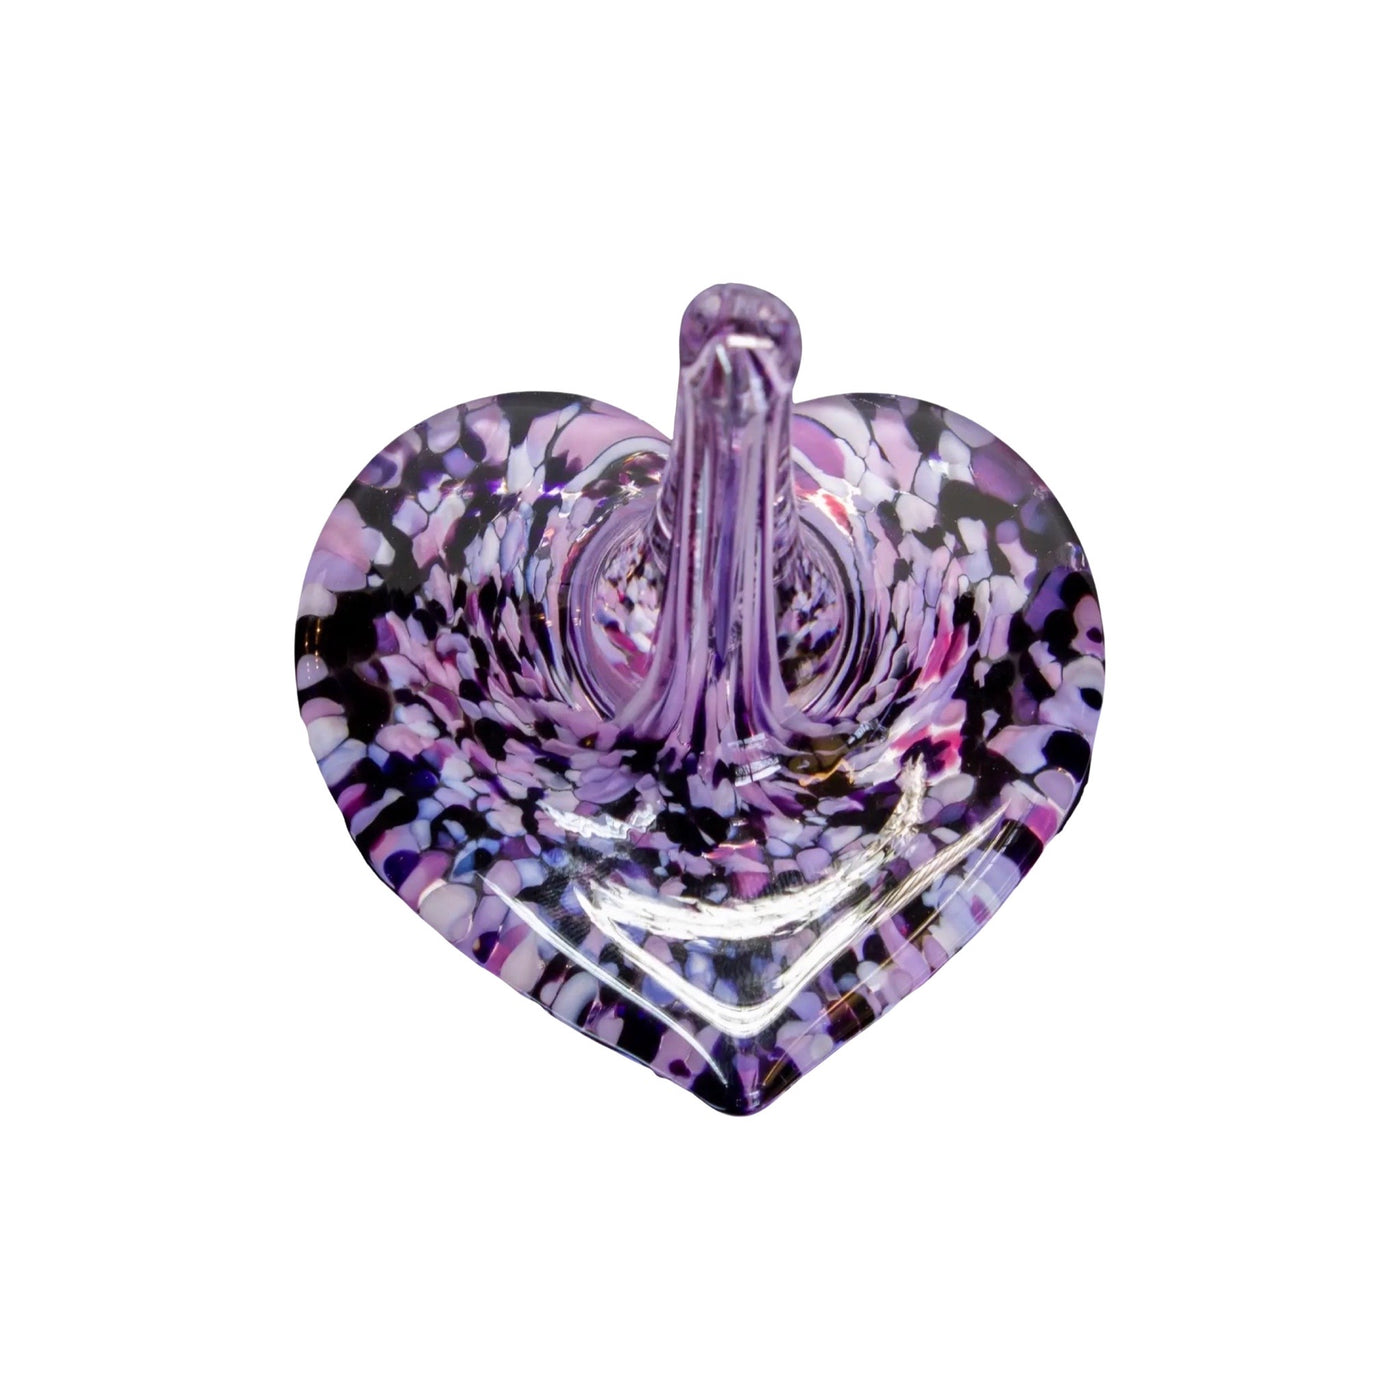 Ring Holder Heart/Periwinkle